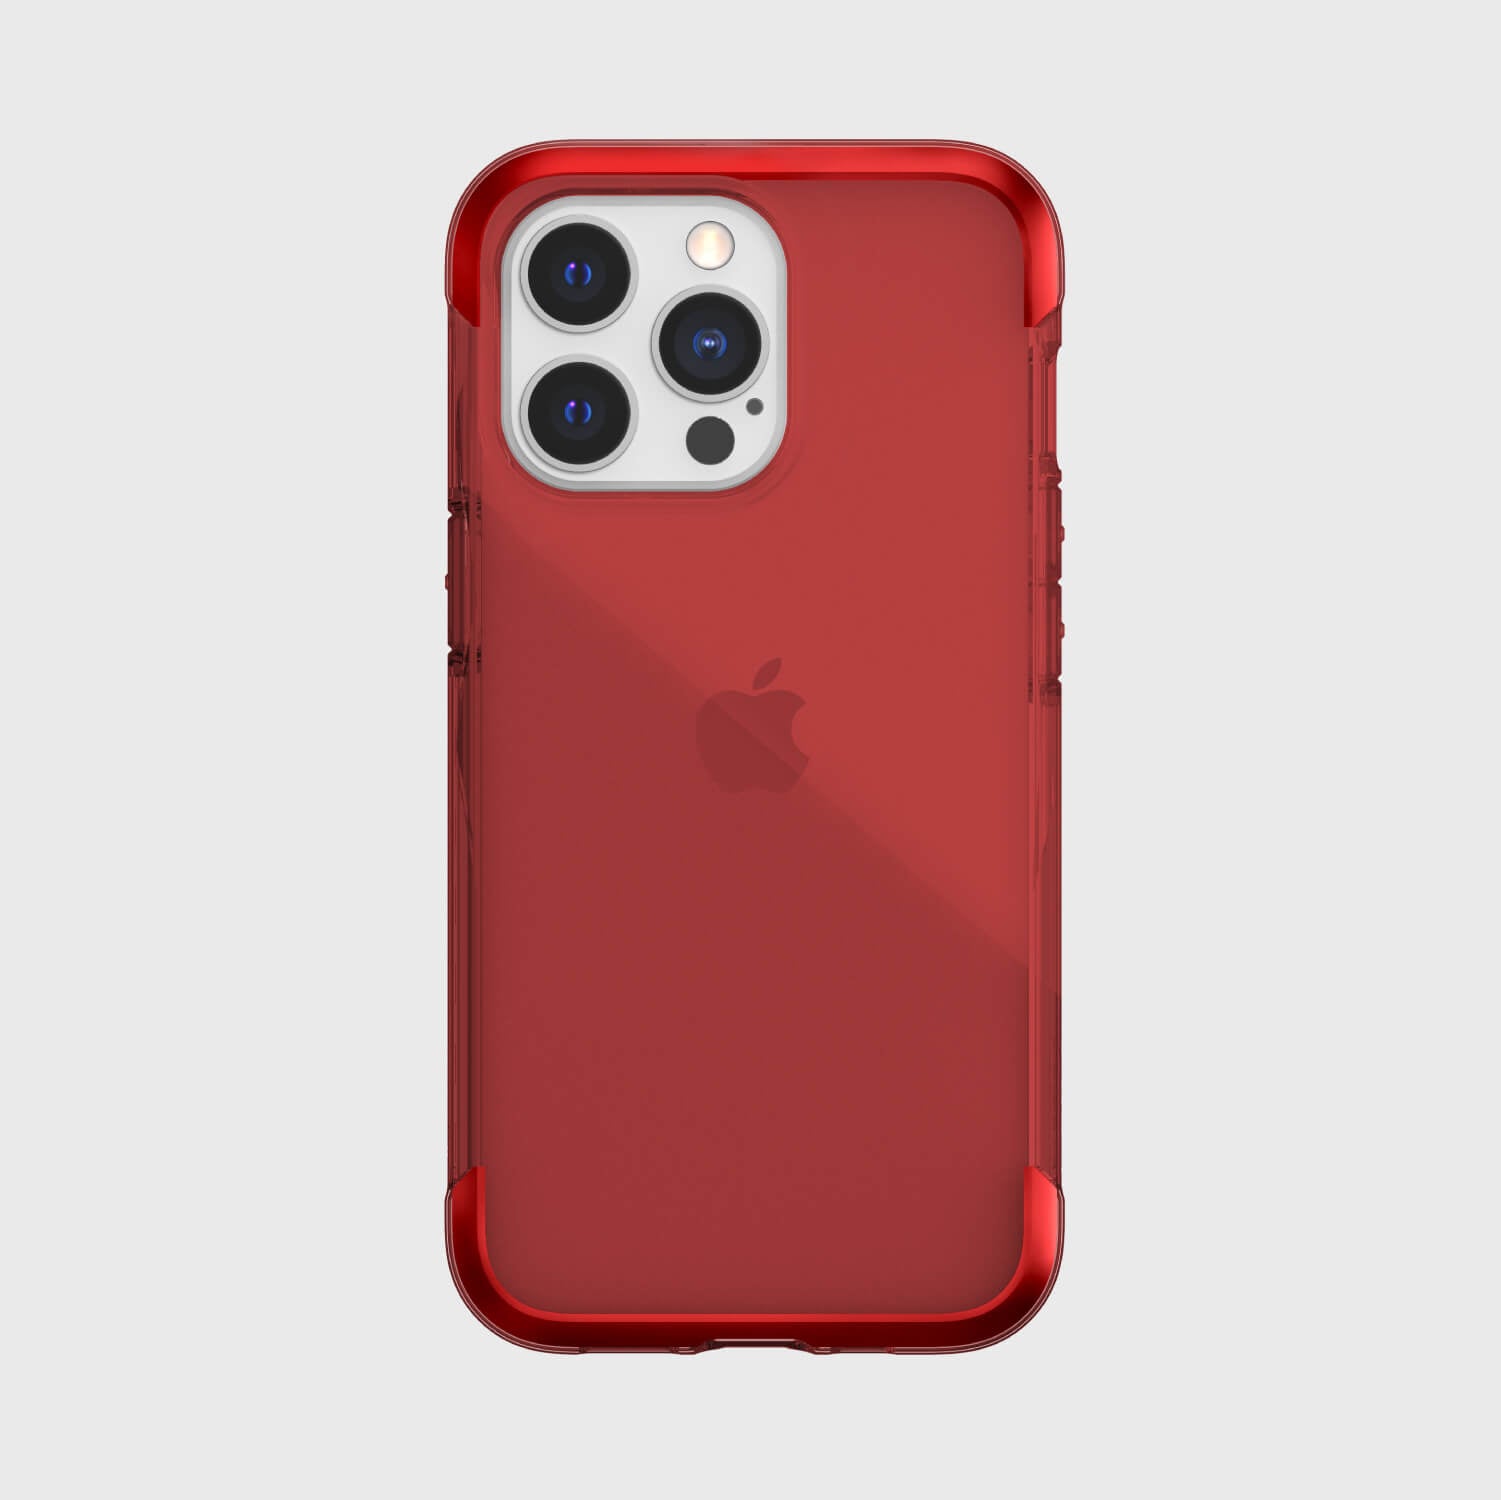 A red Raptic iPhone 13 Pro Max Case - AIR cell phone with multiple cameras and 13-foot drop protection.